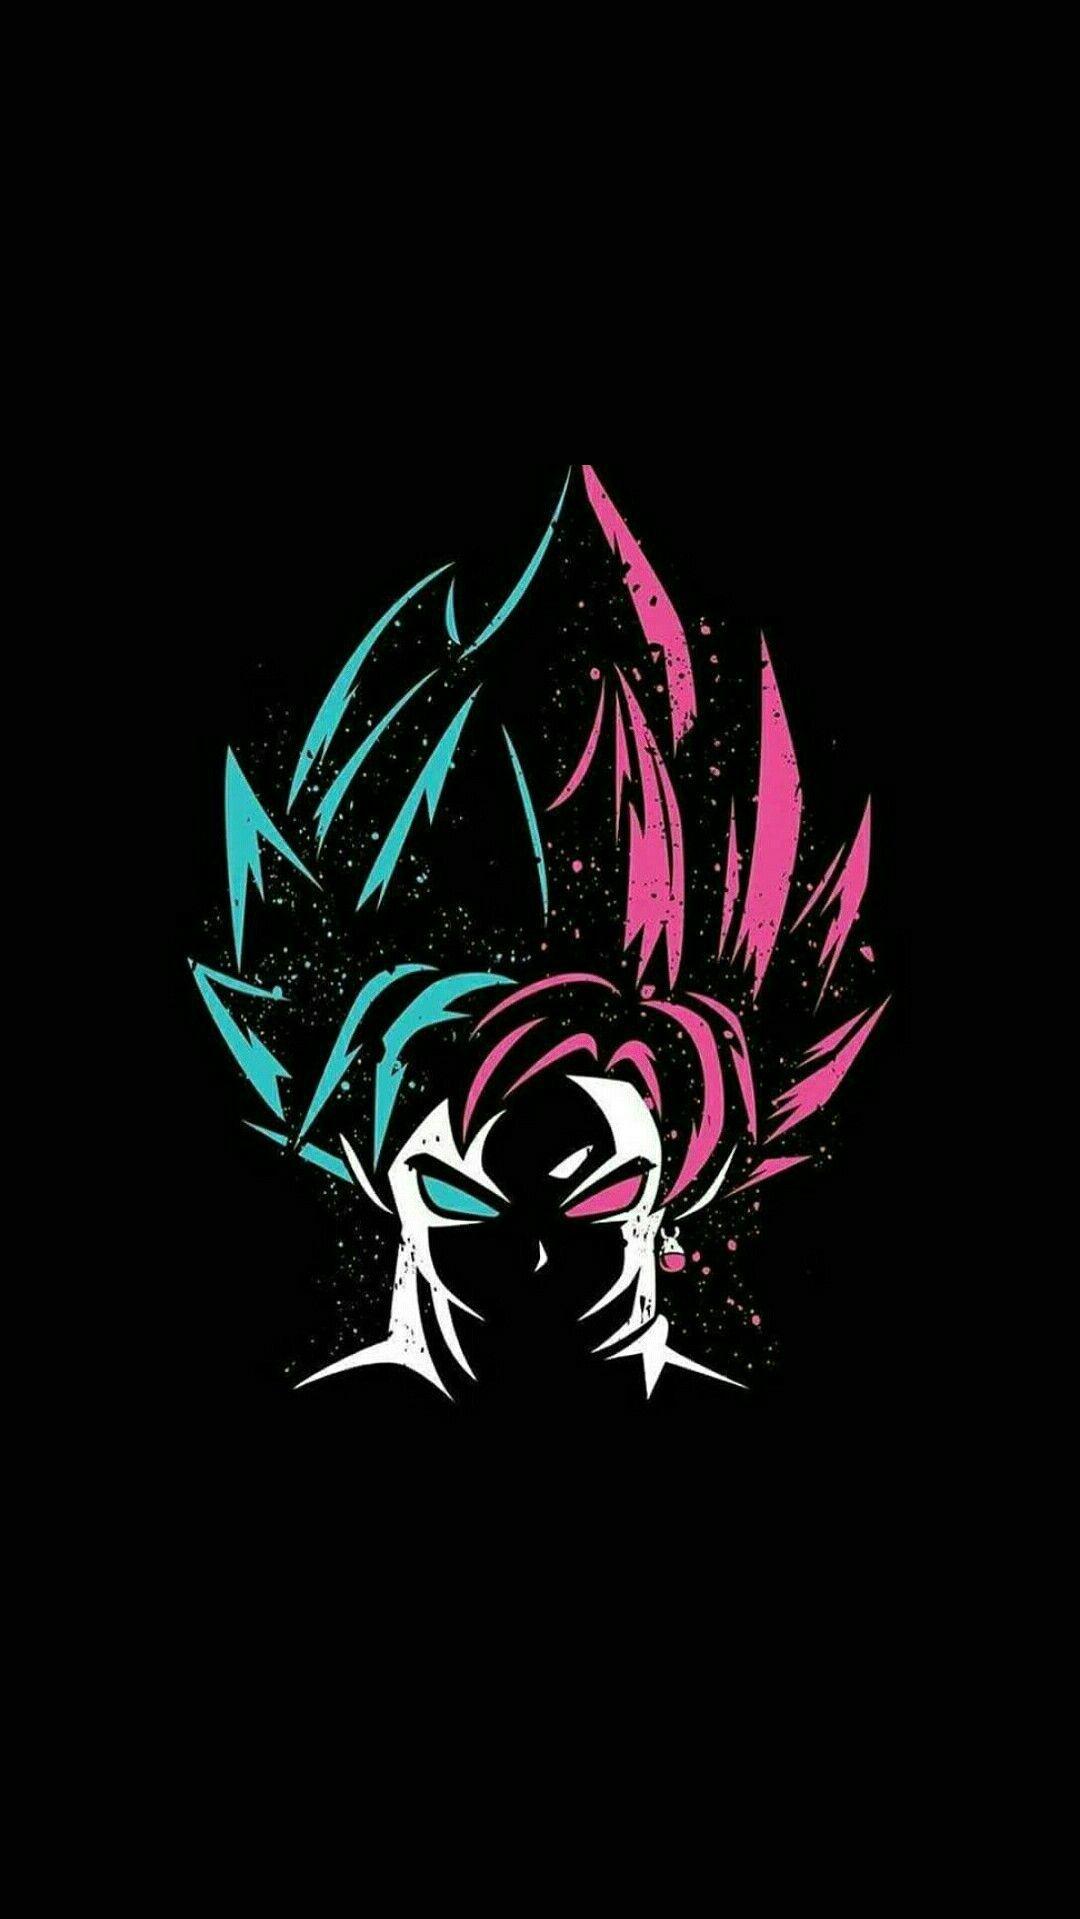 iPhone Wallpaper for iPhone iPhone X and iPhone 7. Dragon ball wallpaper iphone, Dragon ball z iphone wallpaper, Dragon ball wallpaper